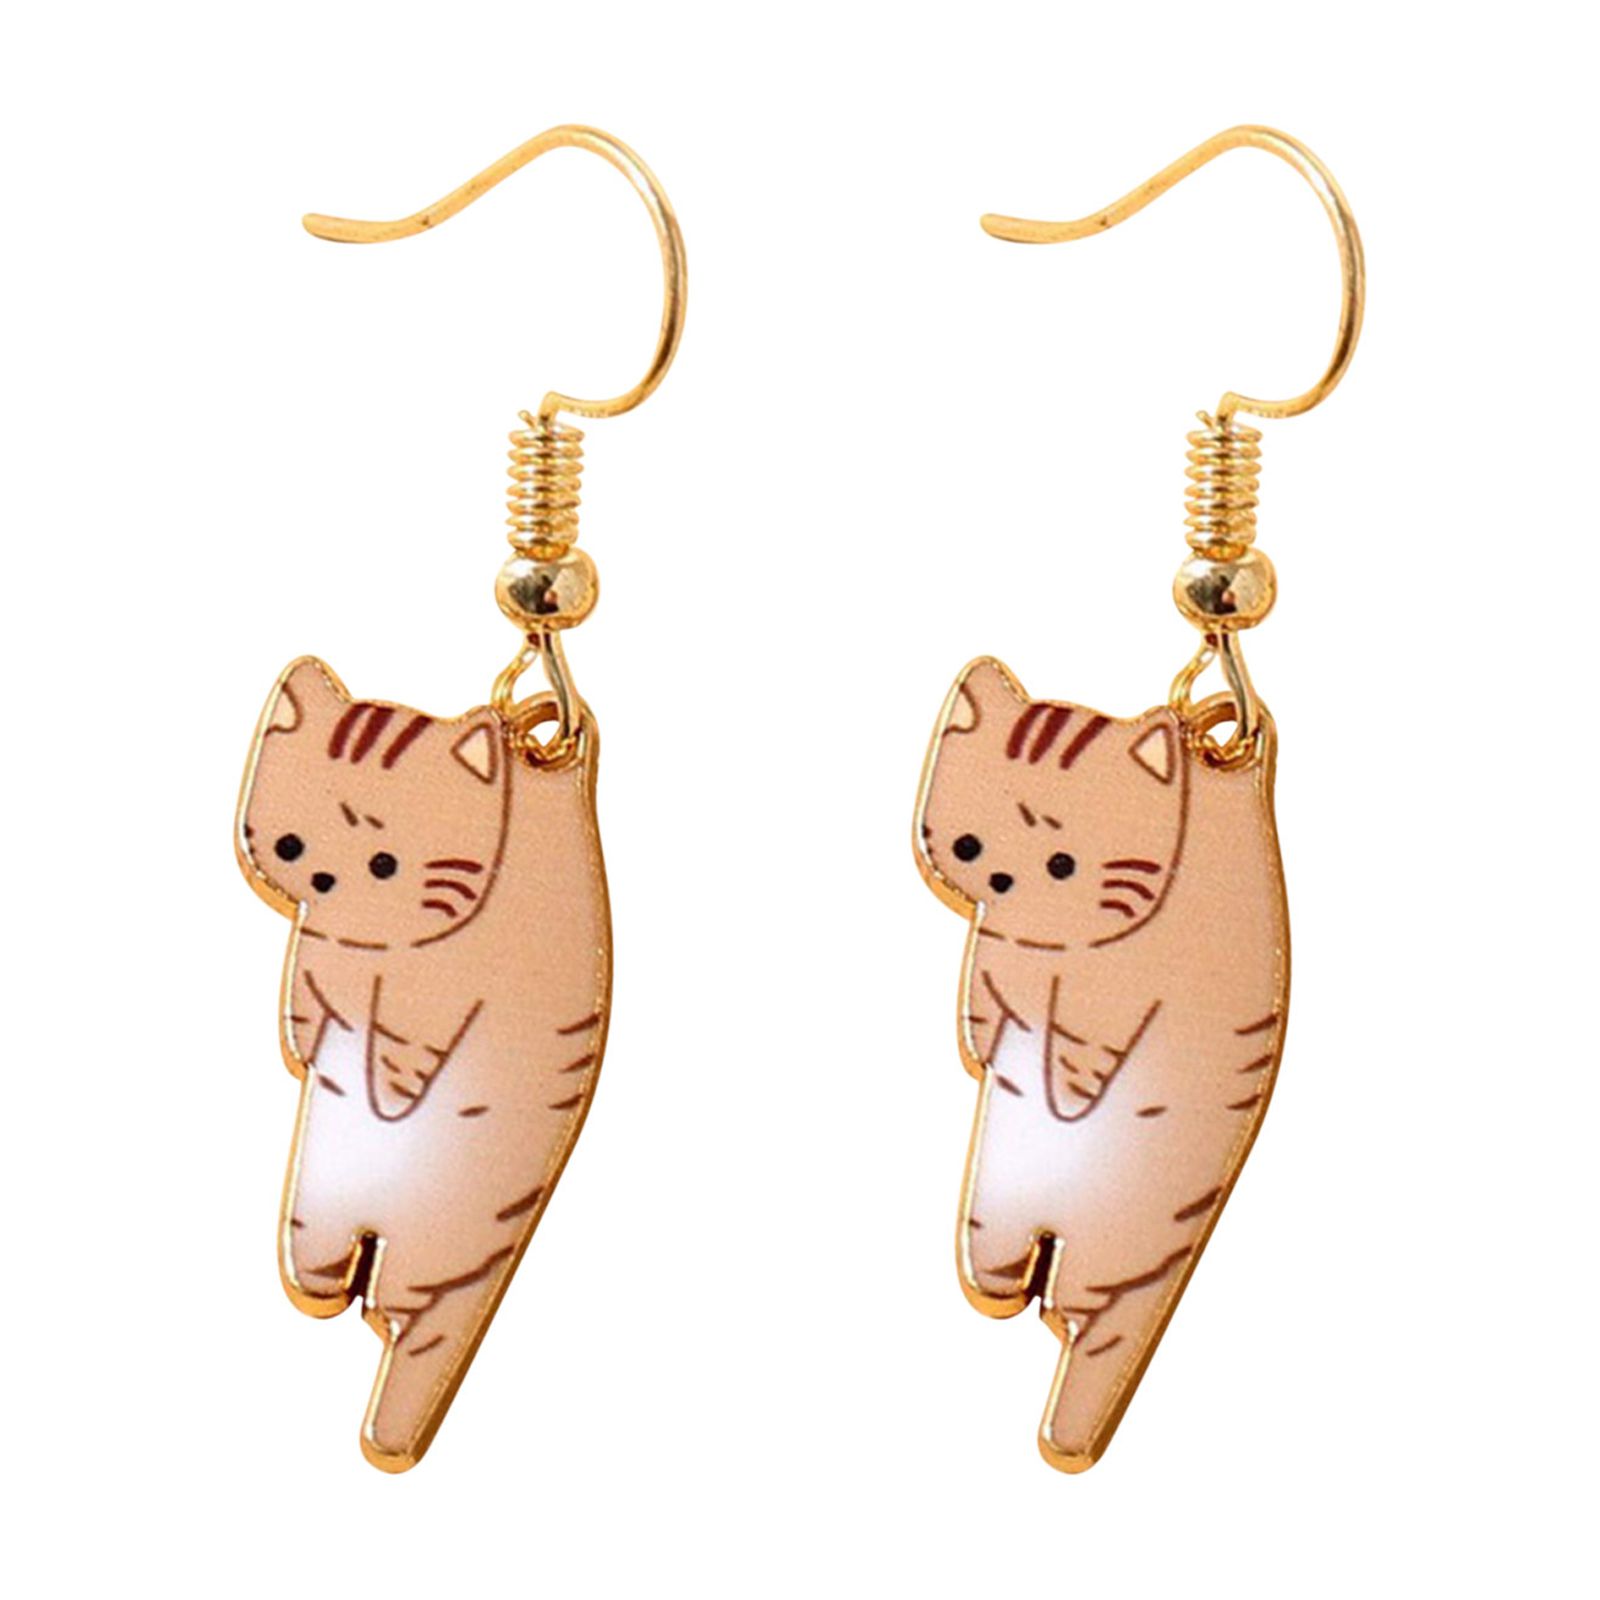 Kayannuo Clearance Cute Cat Dangle Earrings Dangle Cat Earrings Alloy Drop Earrings With Hypoallergenic French Hook Animal - image 2 of 3